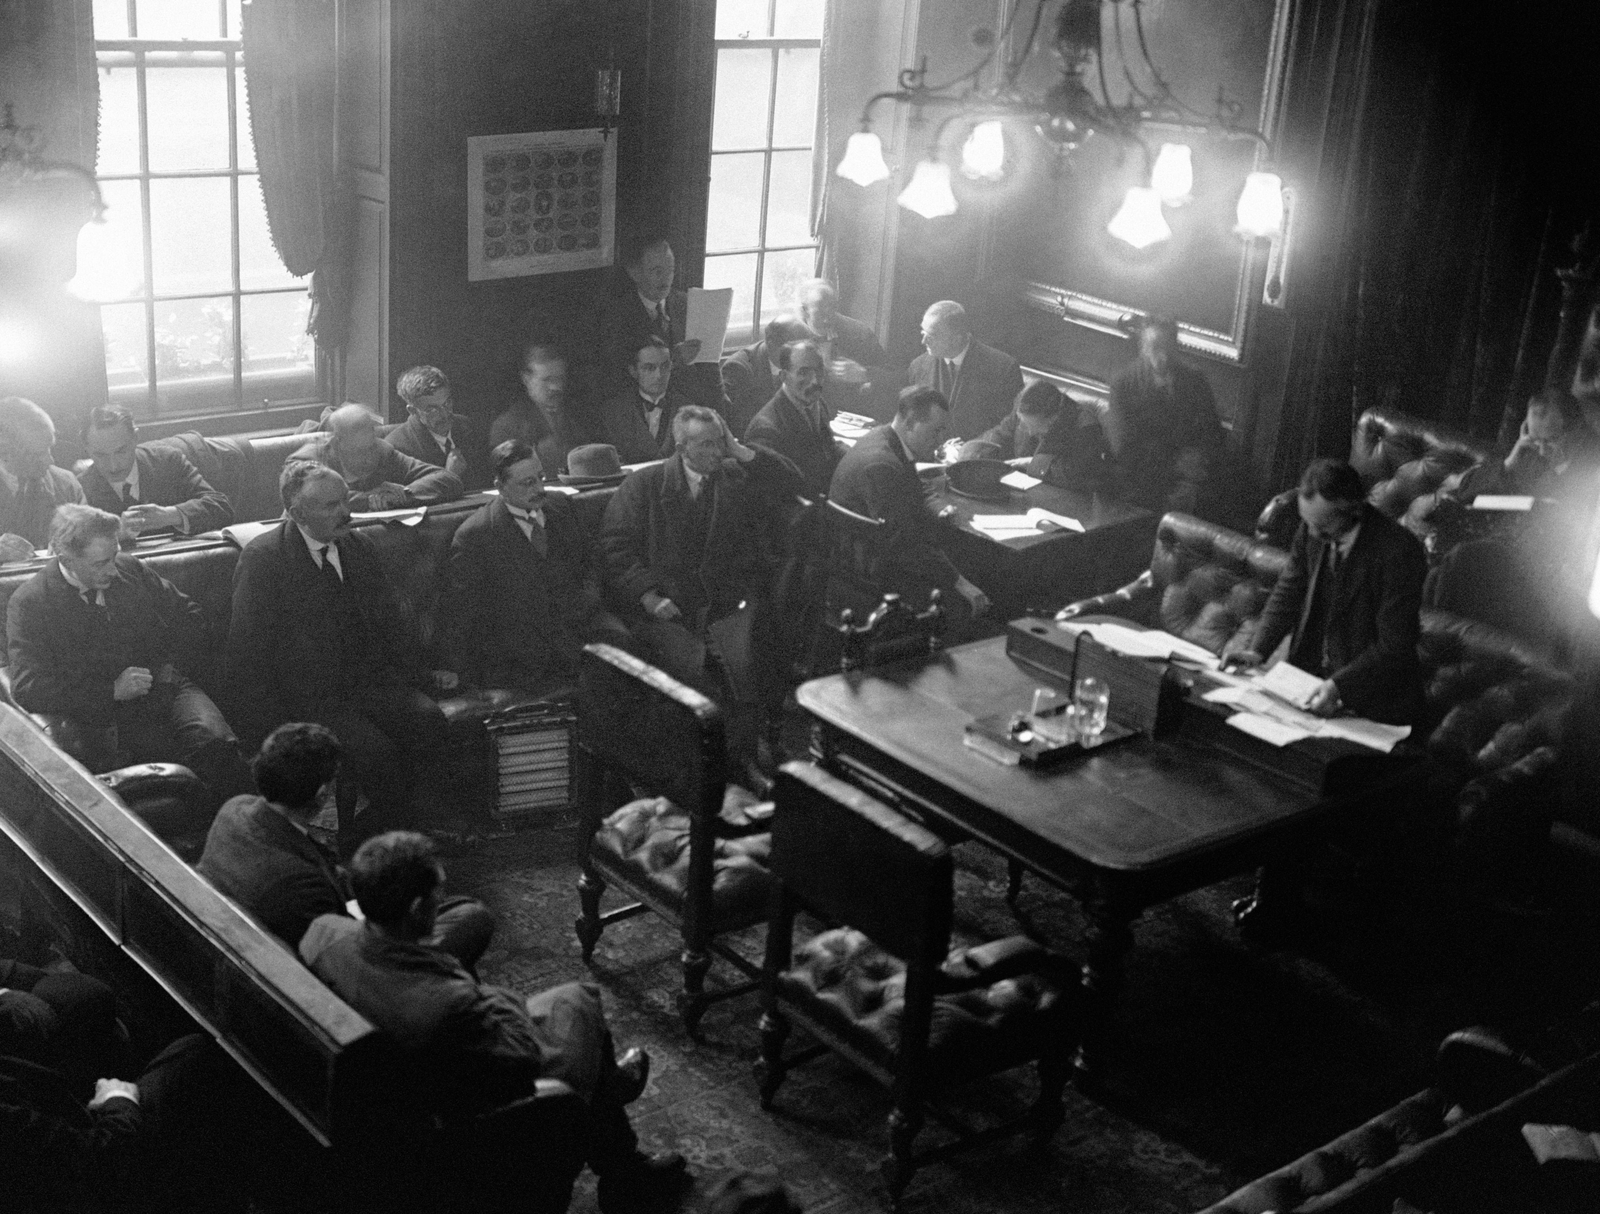 Image - An early appearance in the Mansion House for the new cabinet, in the days after the vote to ratify the Treaty. Arthur Griffith and Liam Cosgrave are seated on the left of centre, and Michael Collins and Richard Mulcahy face the speaker. Credit: Alamy